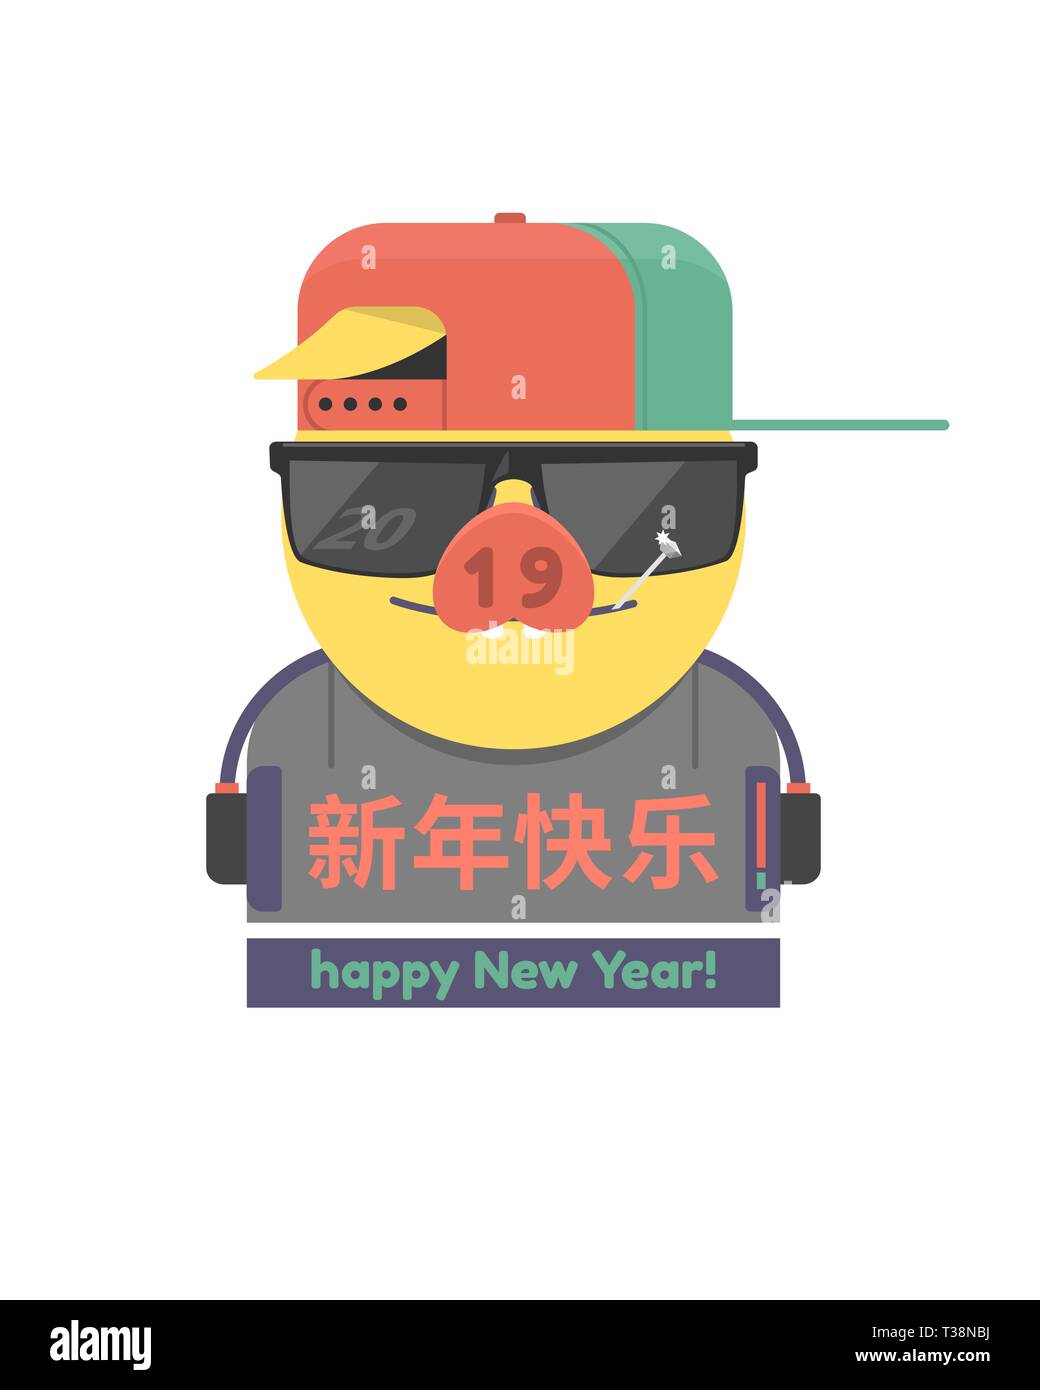 Flat Vector Illustration Of A Yellow Hip Hop Pig For Chinese New